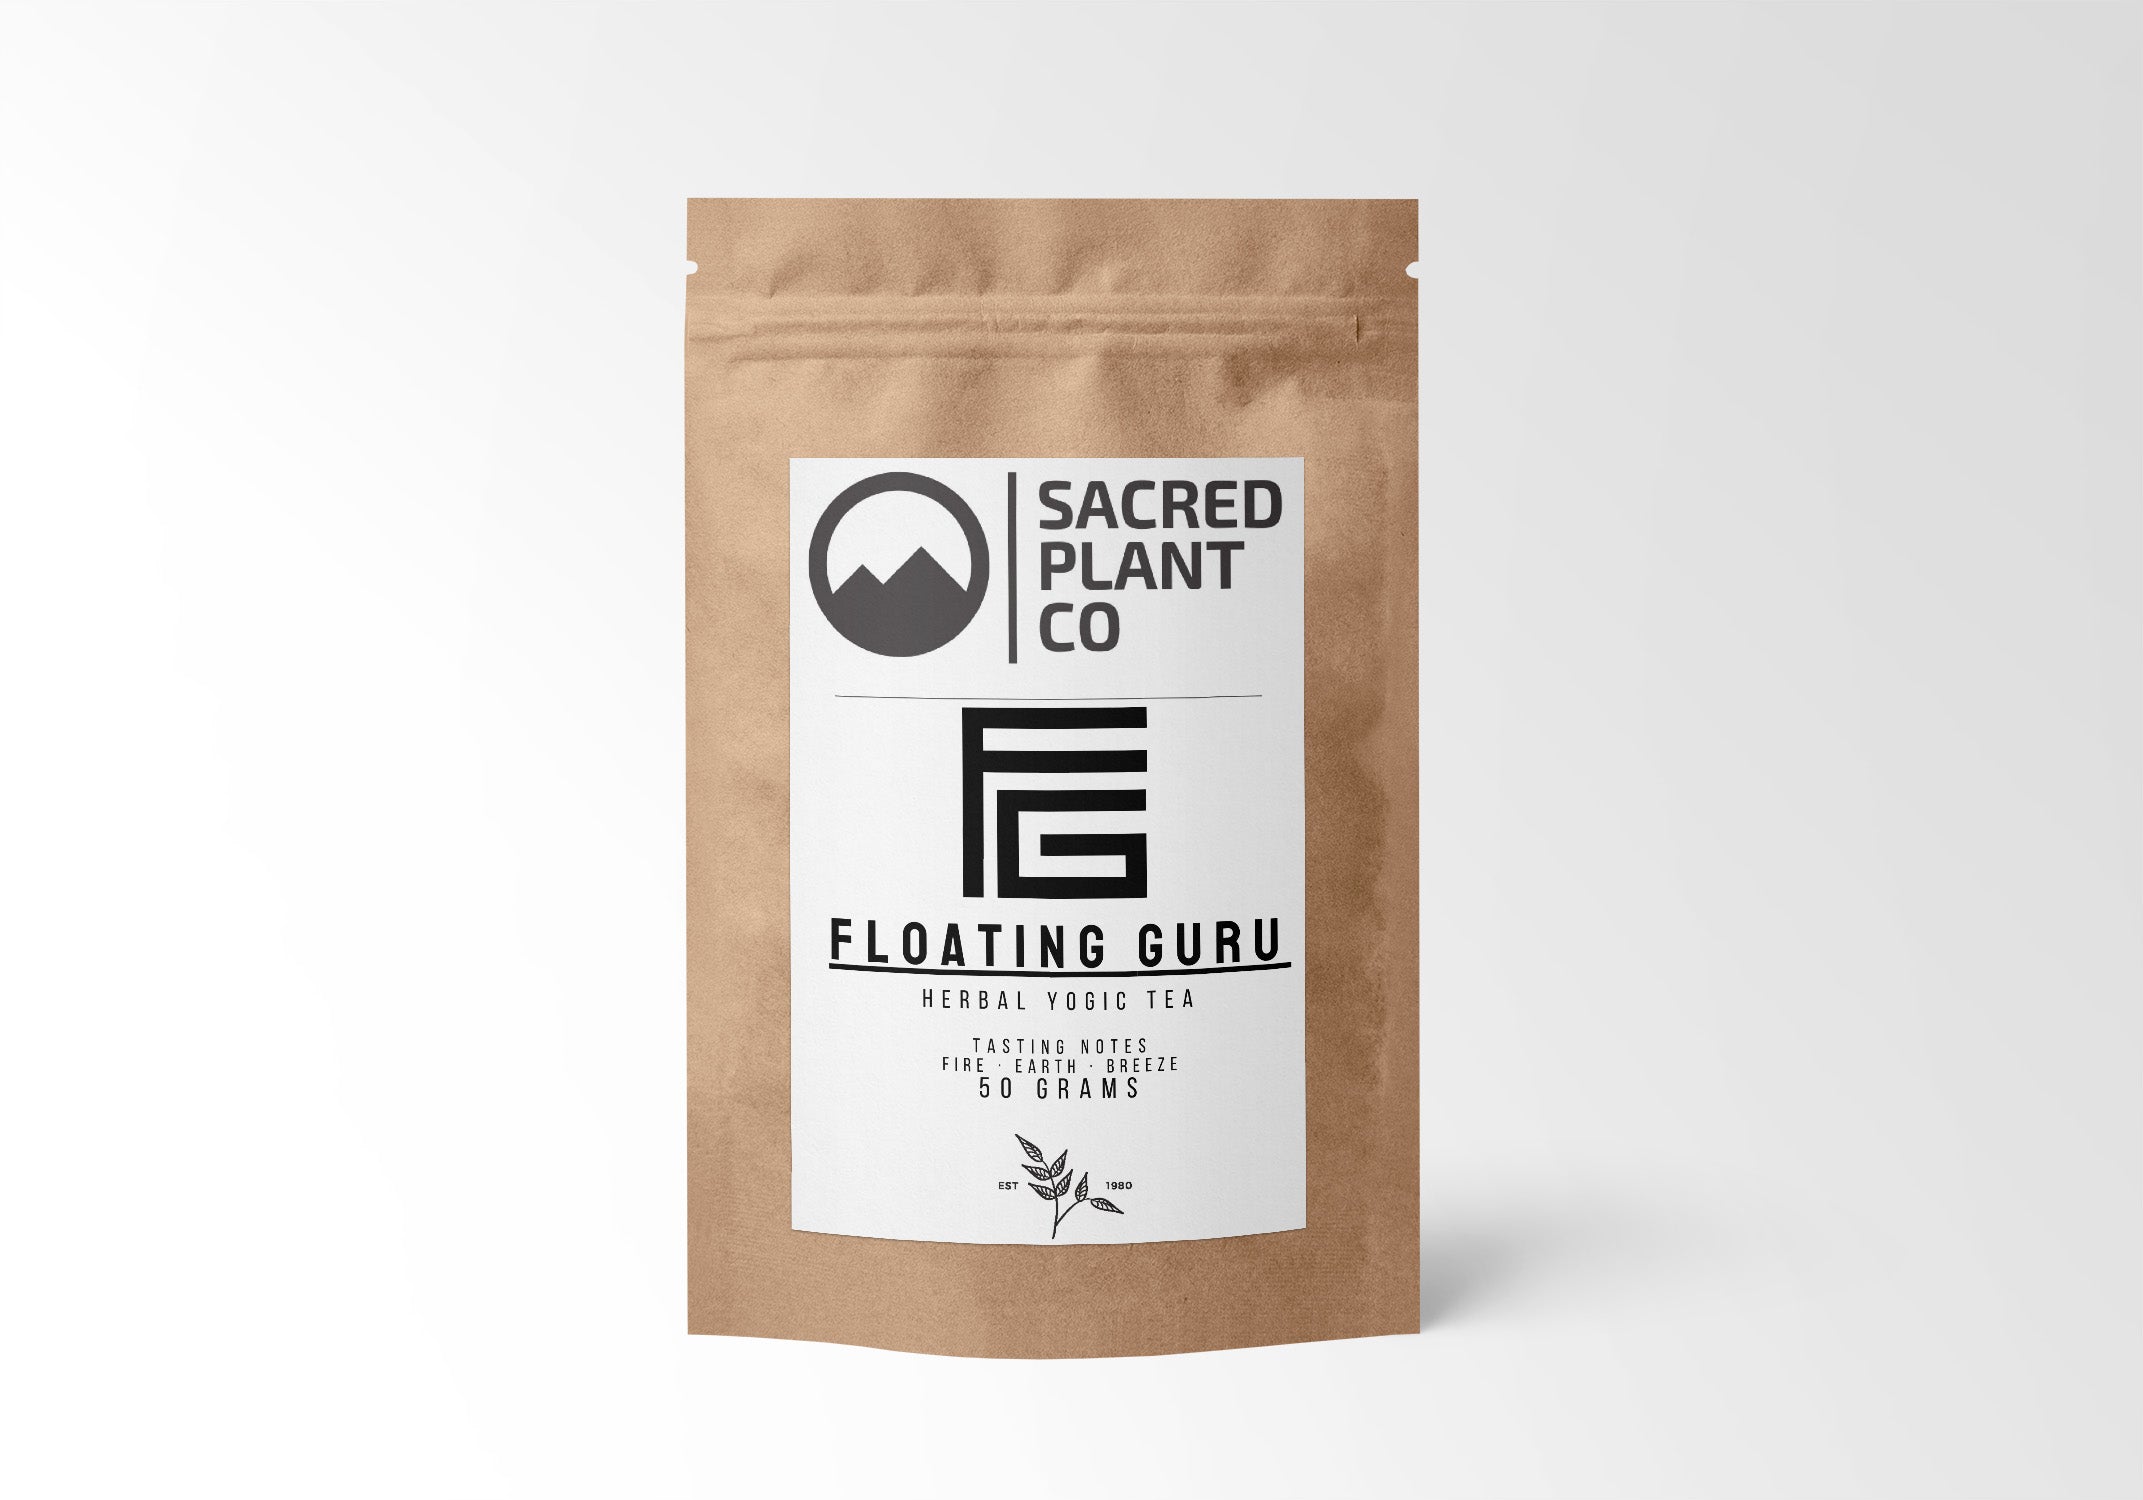 A 50-gram pack of Sacred Plant Co Floating Guru Herbal Yogic Tea on a plain background, featuring a clean and modern design with tasting notes of fire, earth, and breeze.